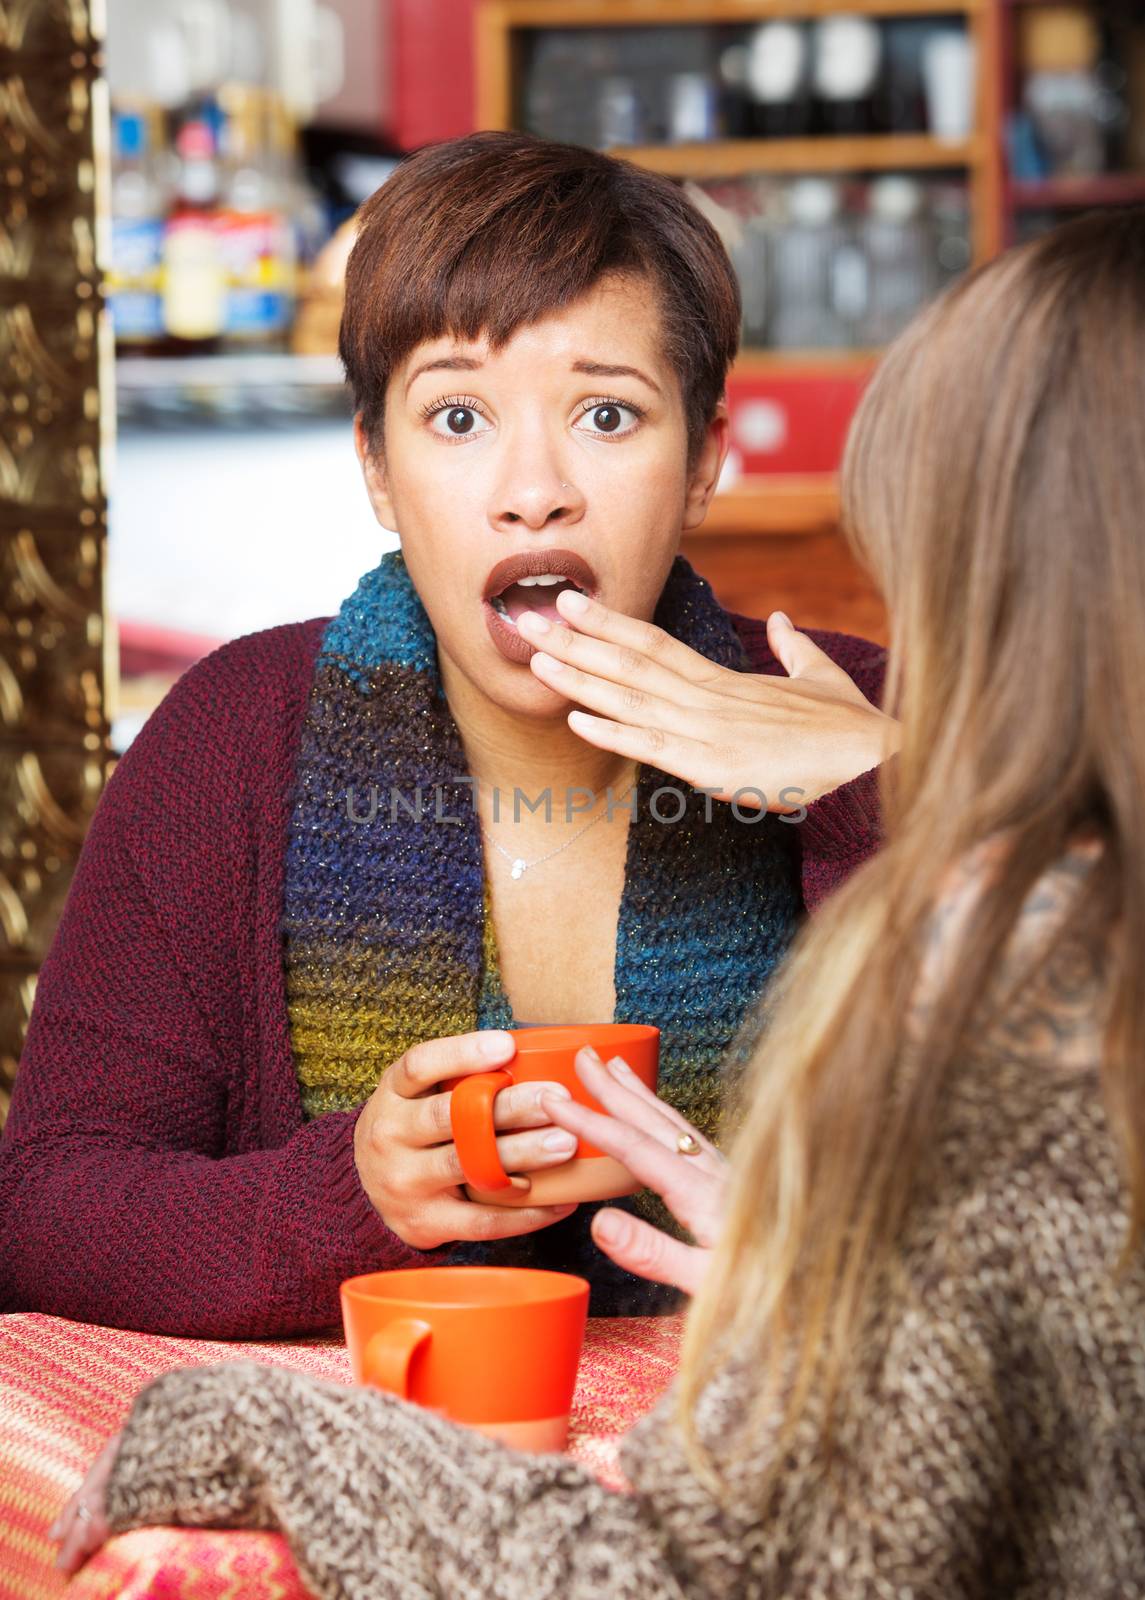 Shocked woman with hand covering mouth at coffee house